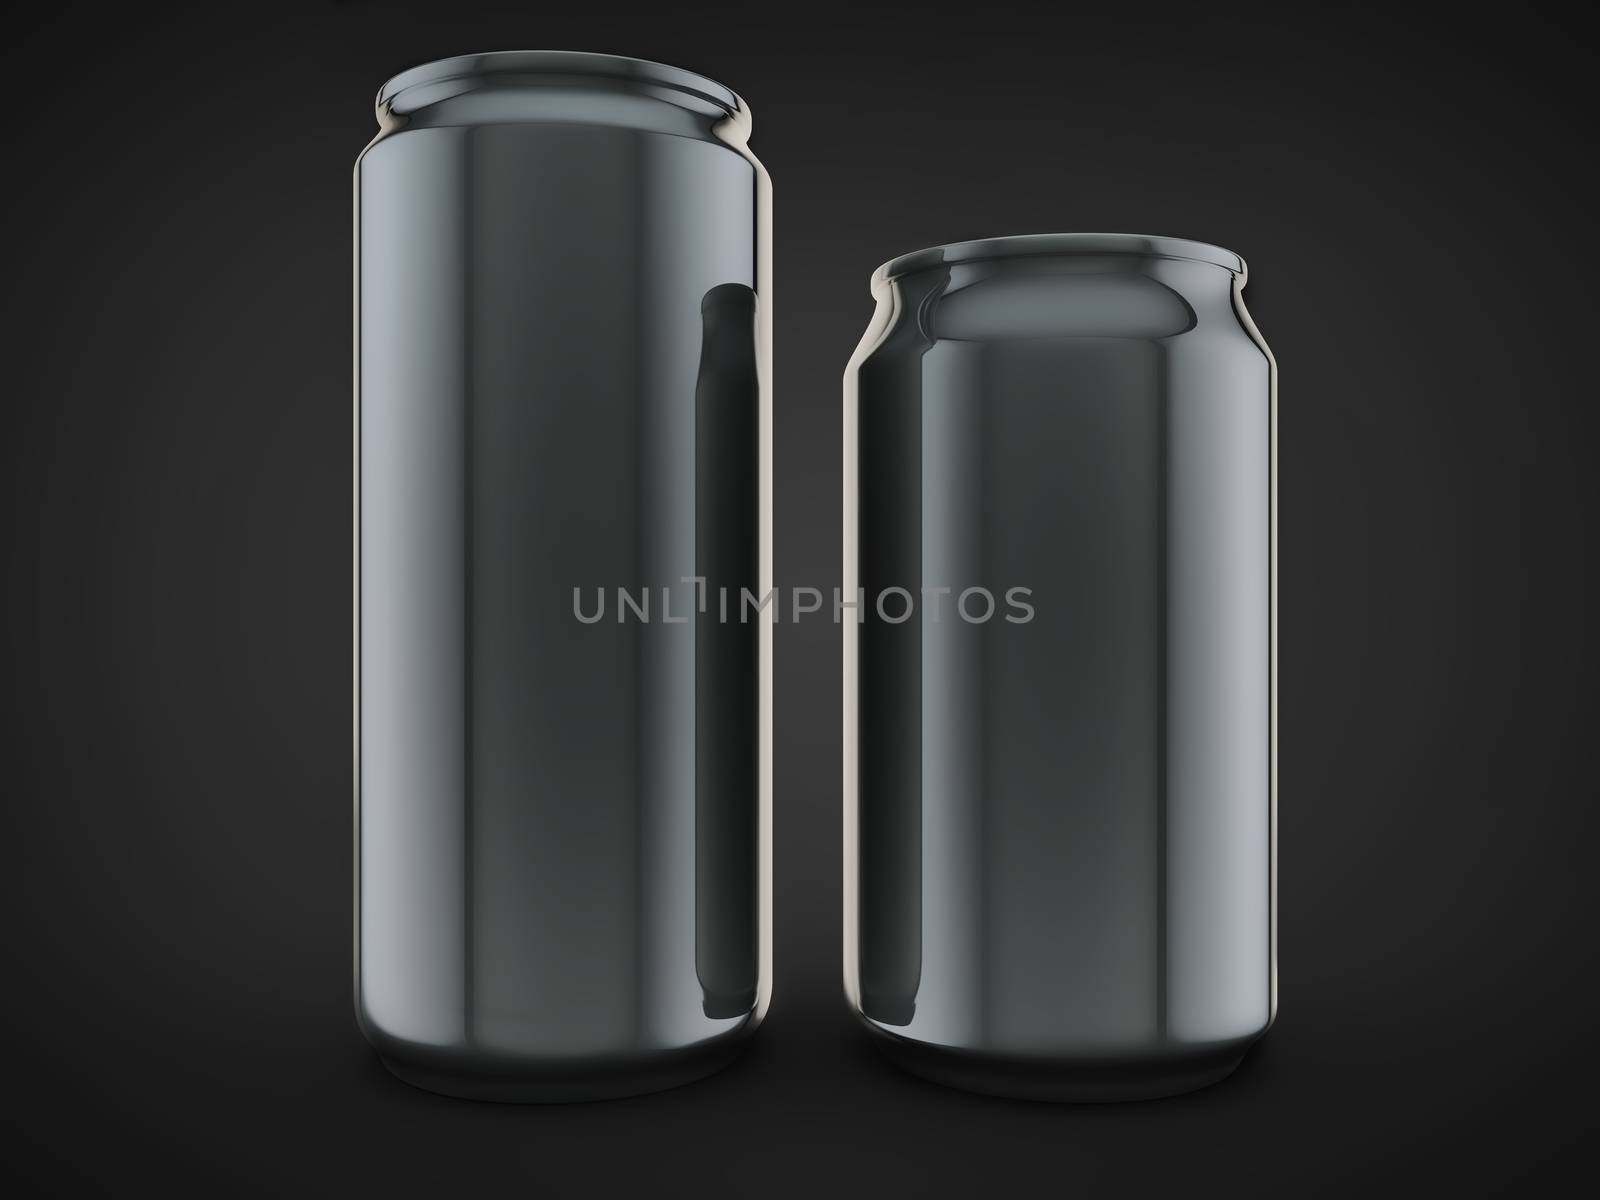 soda beverage can front view pair alluminium by xtate